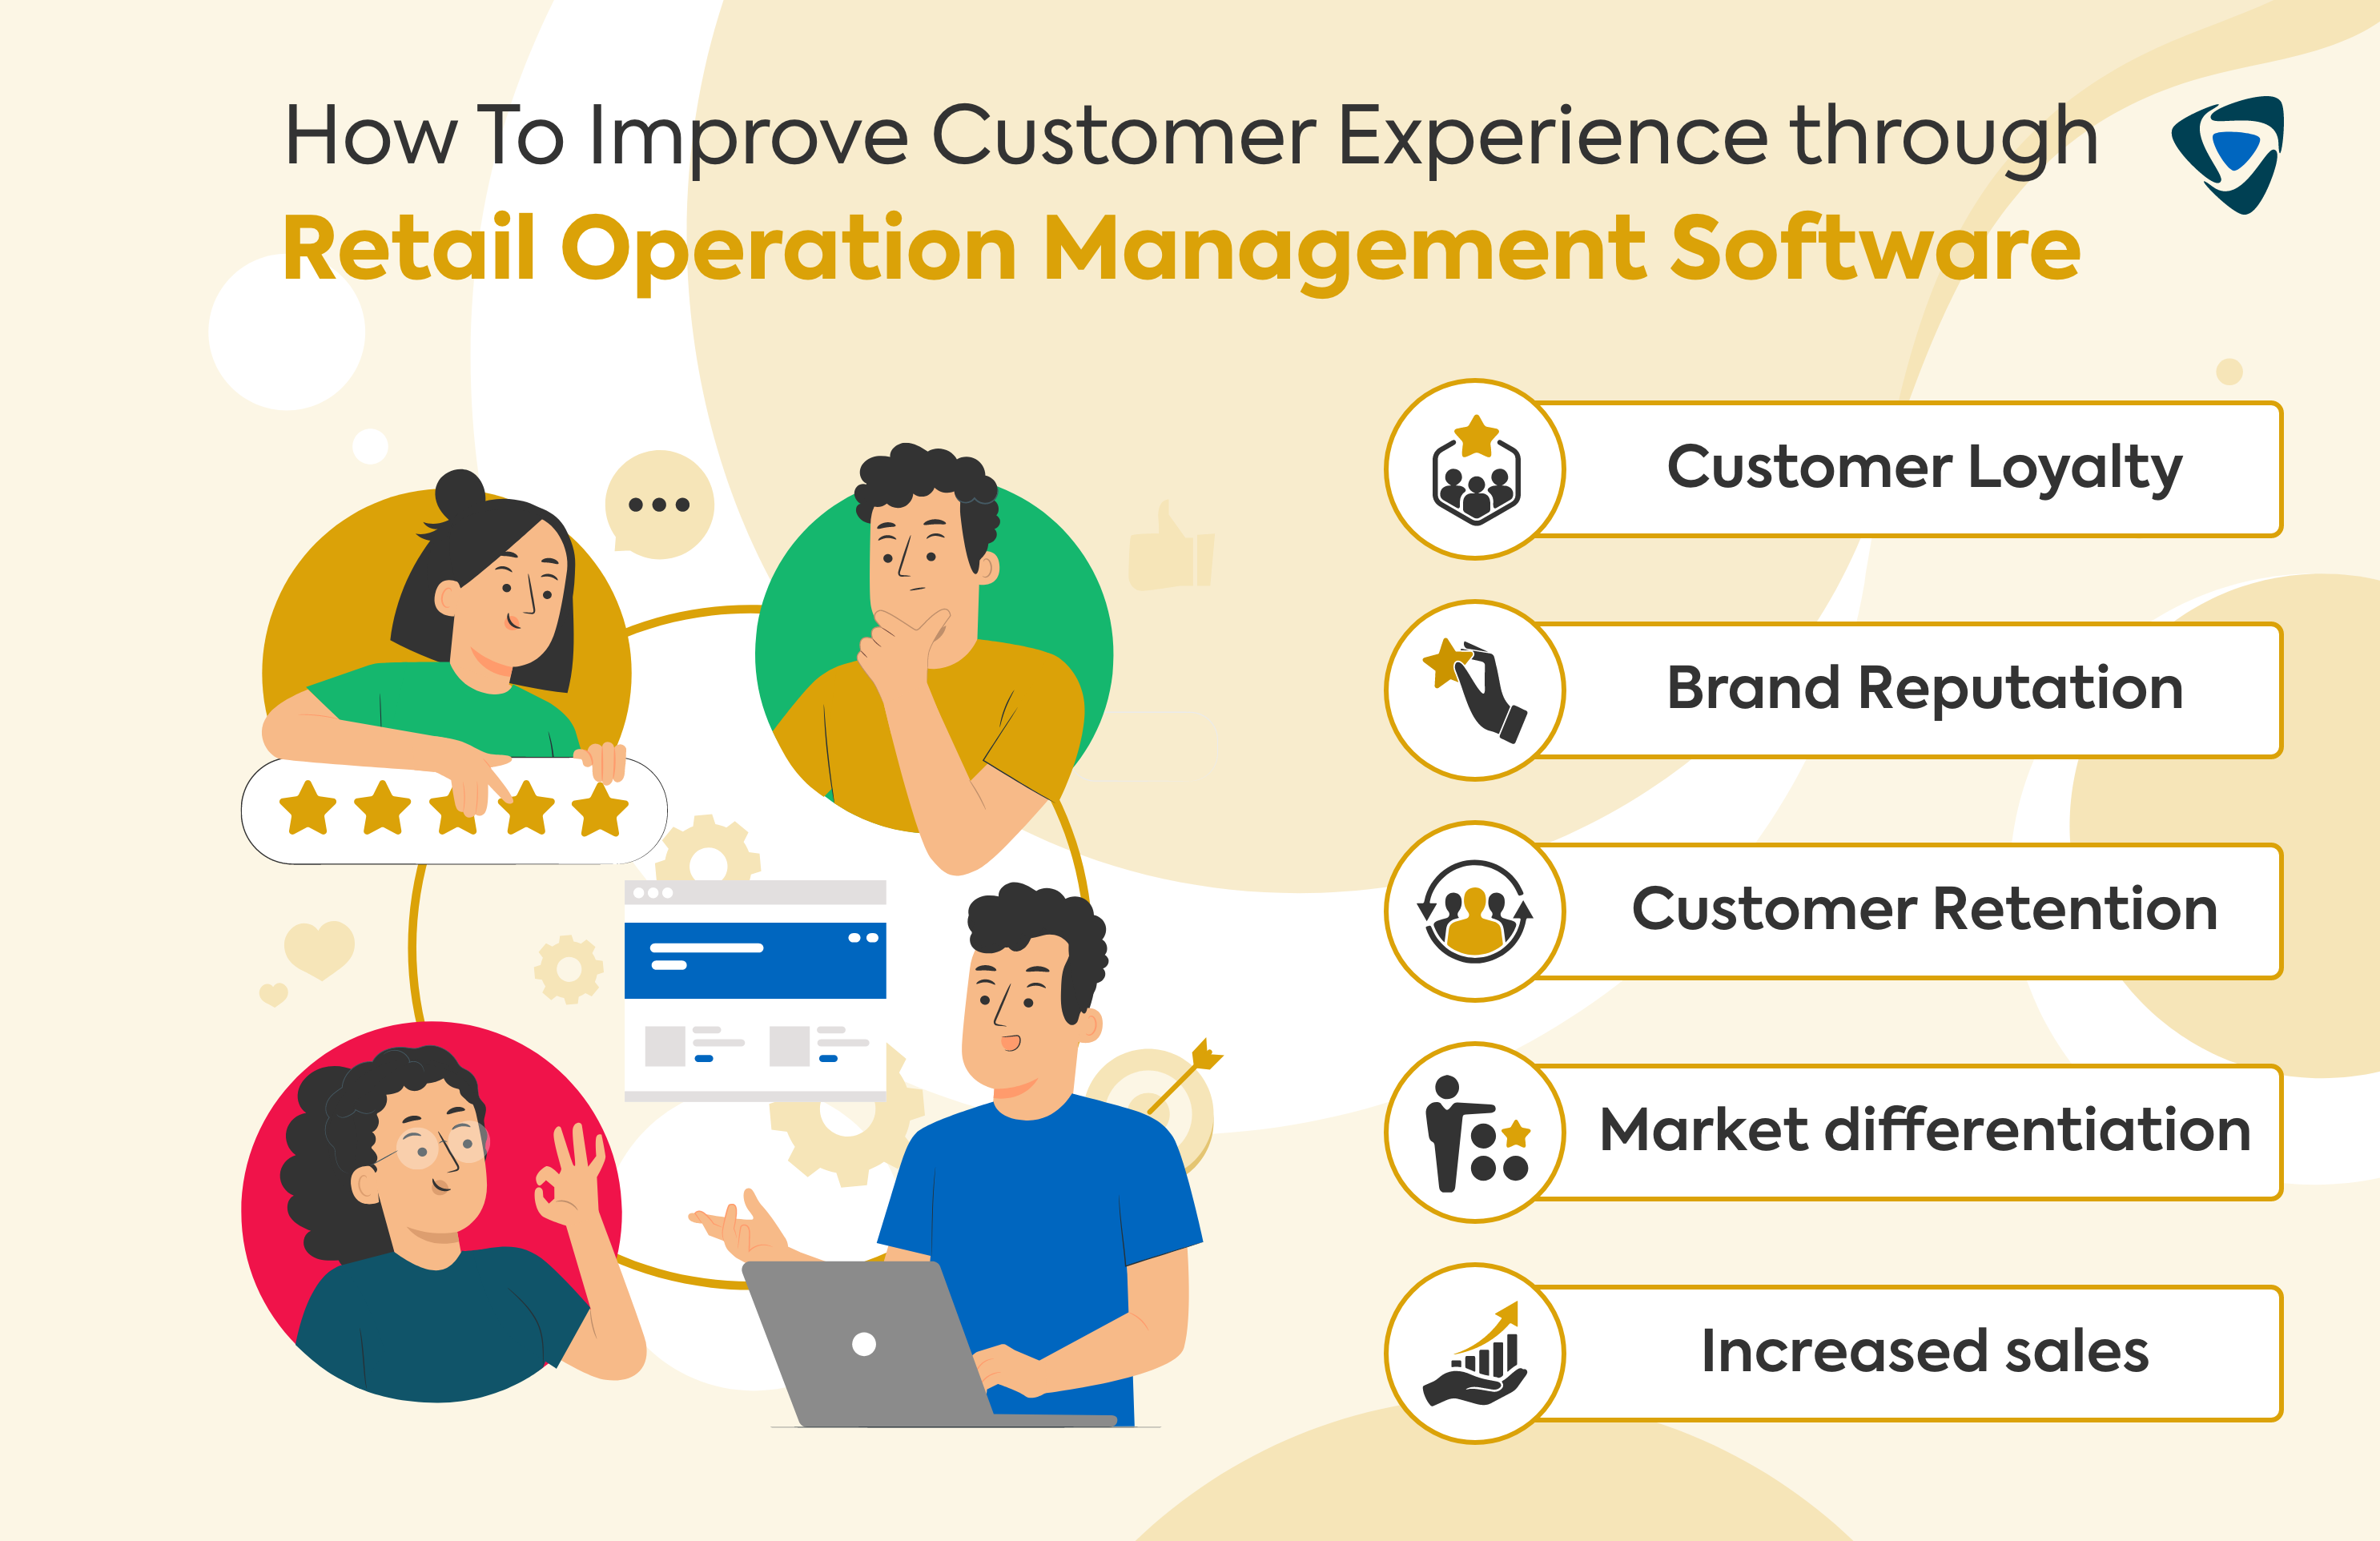 How to Improve Customer Experience through Retail Operation Management Software